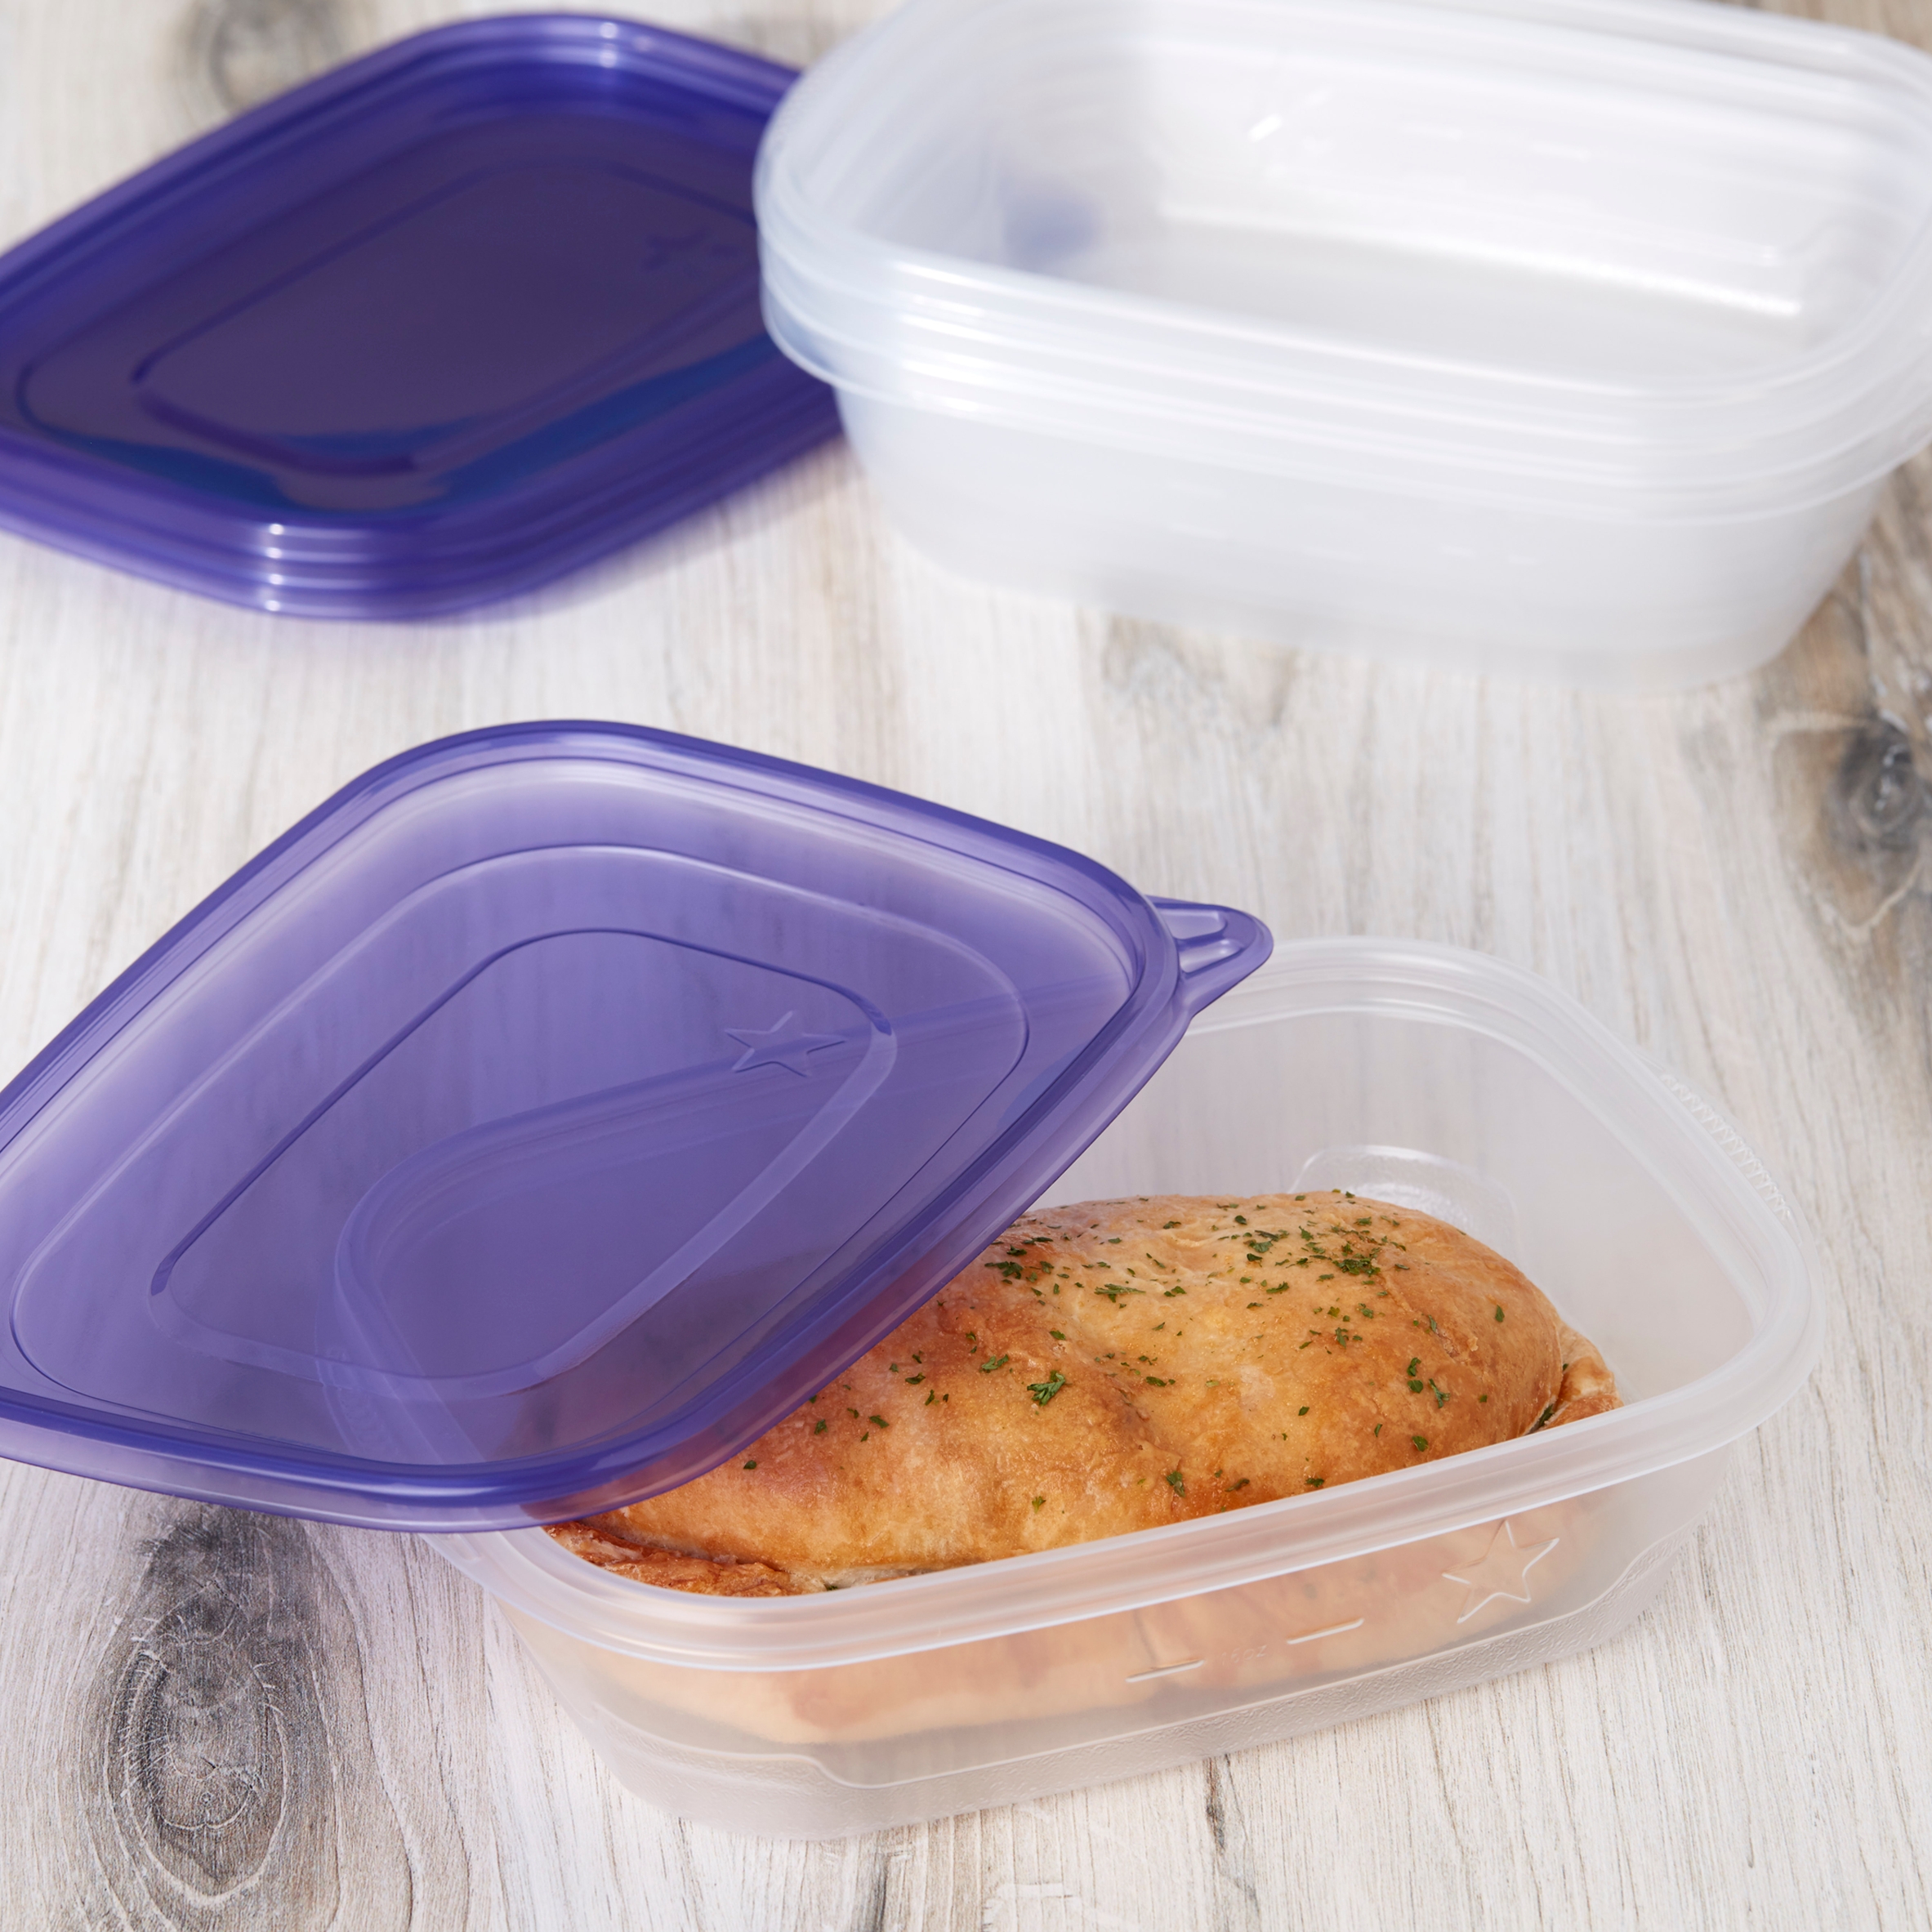 Great Value Take Outs 32 fl oz Storage Container, 4 count - image 2 of 9